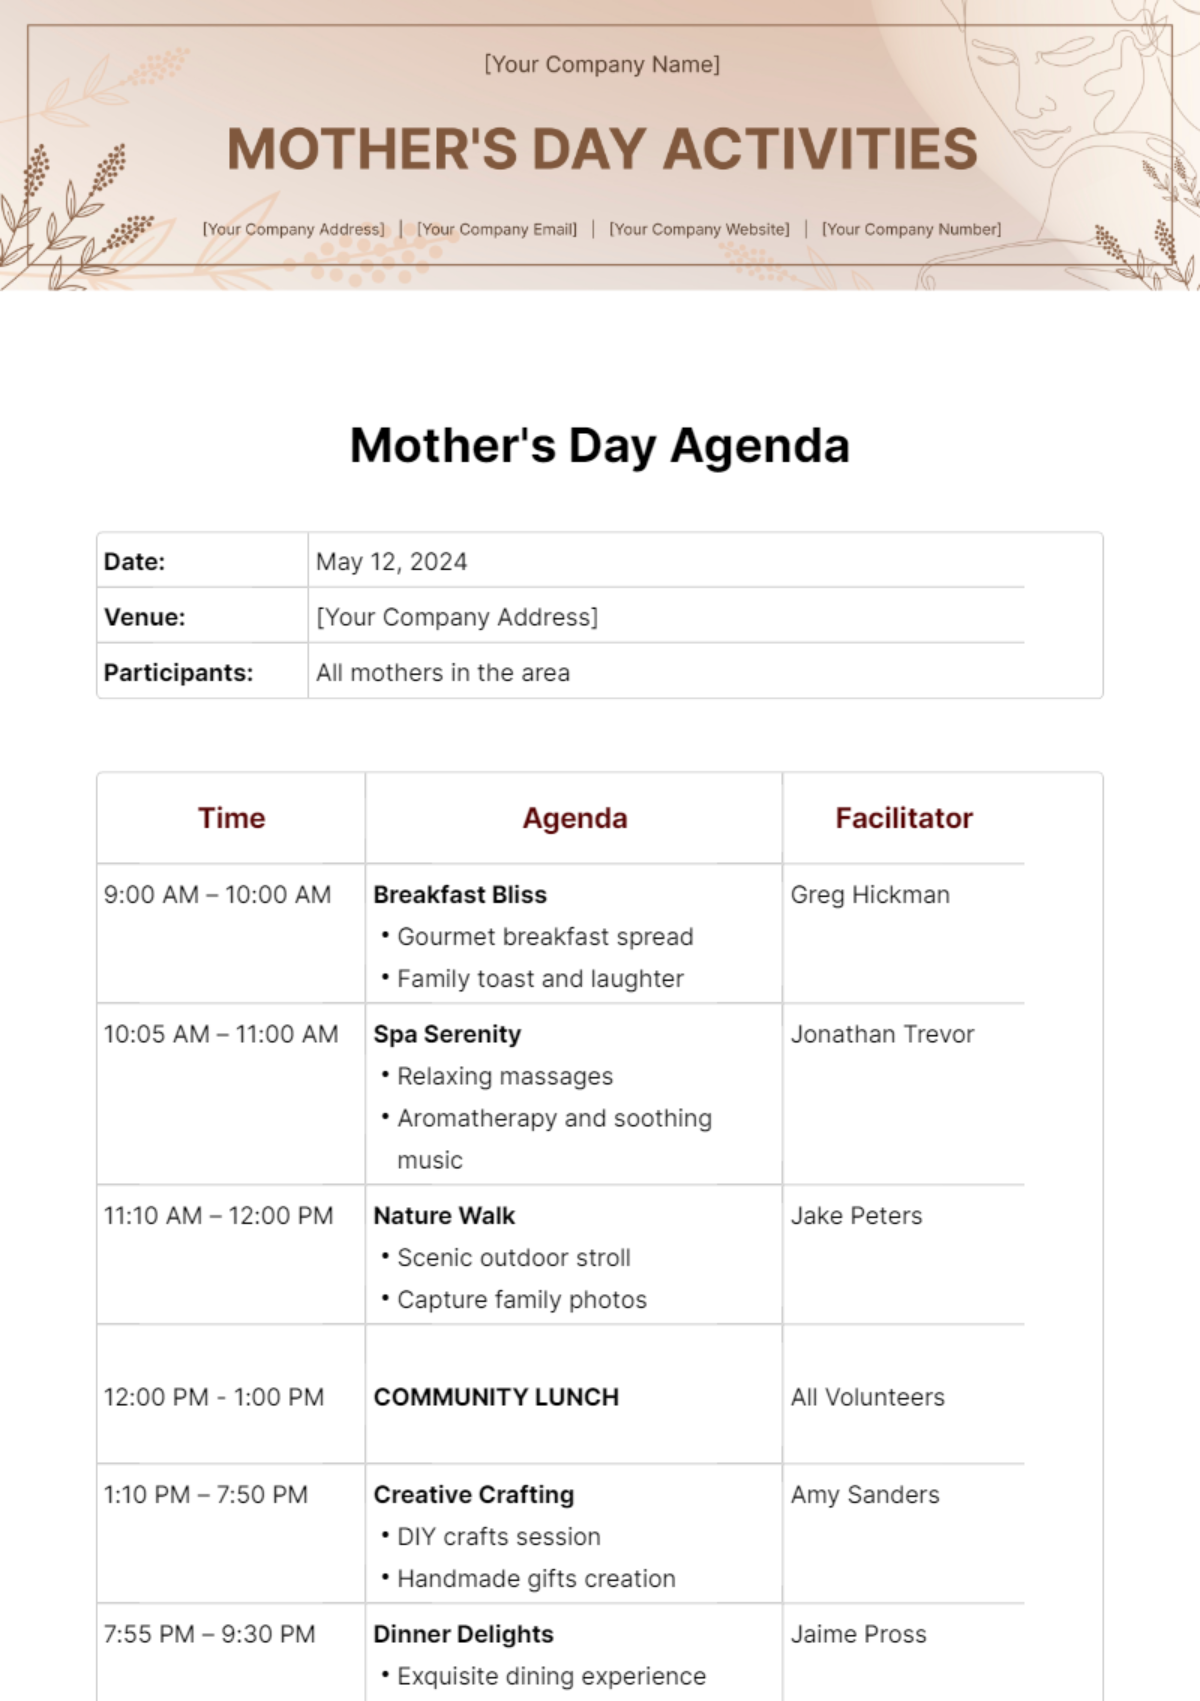 Mother's Day Agenda Template